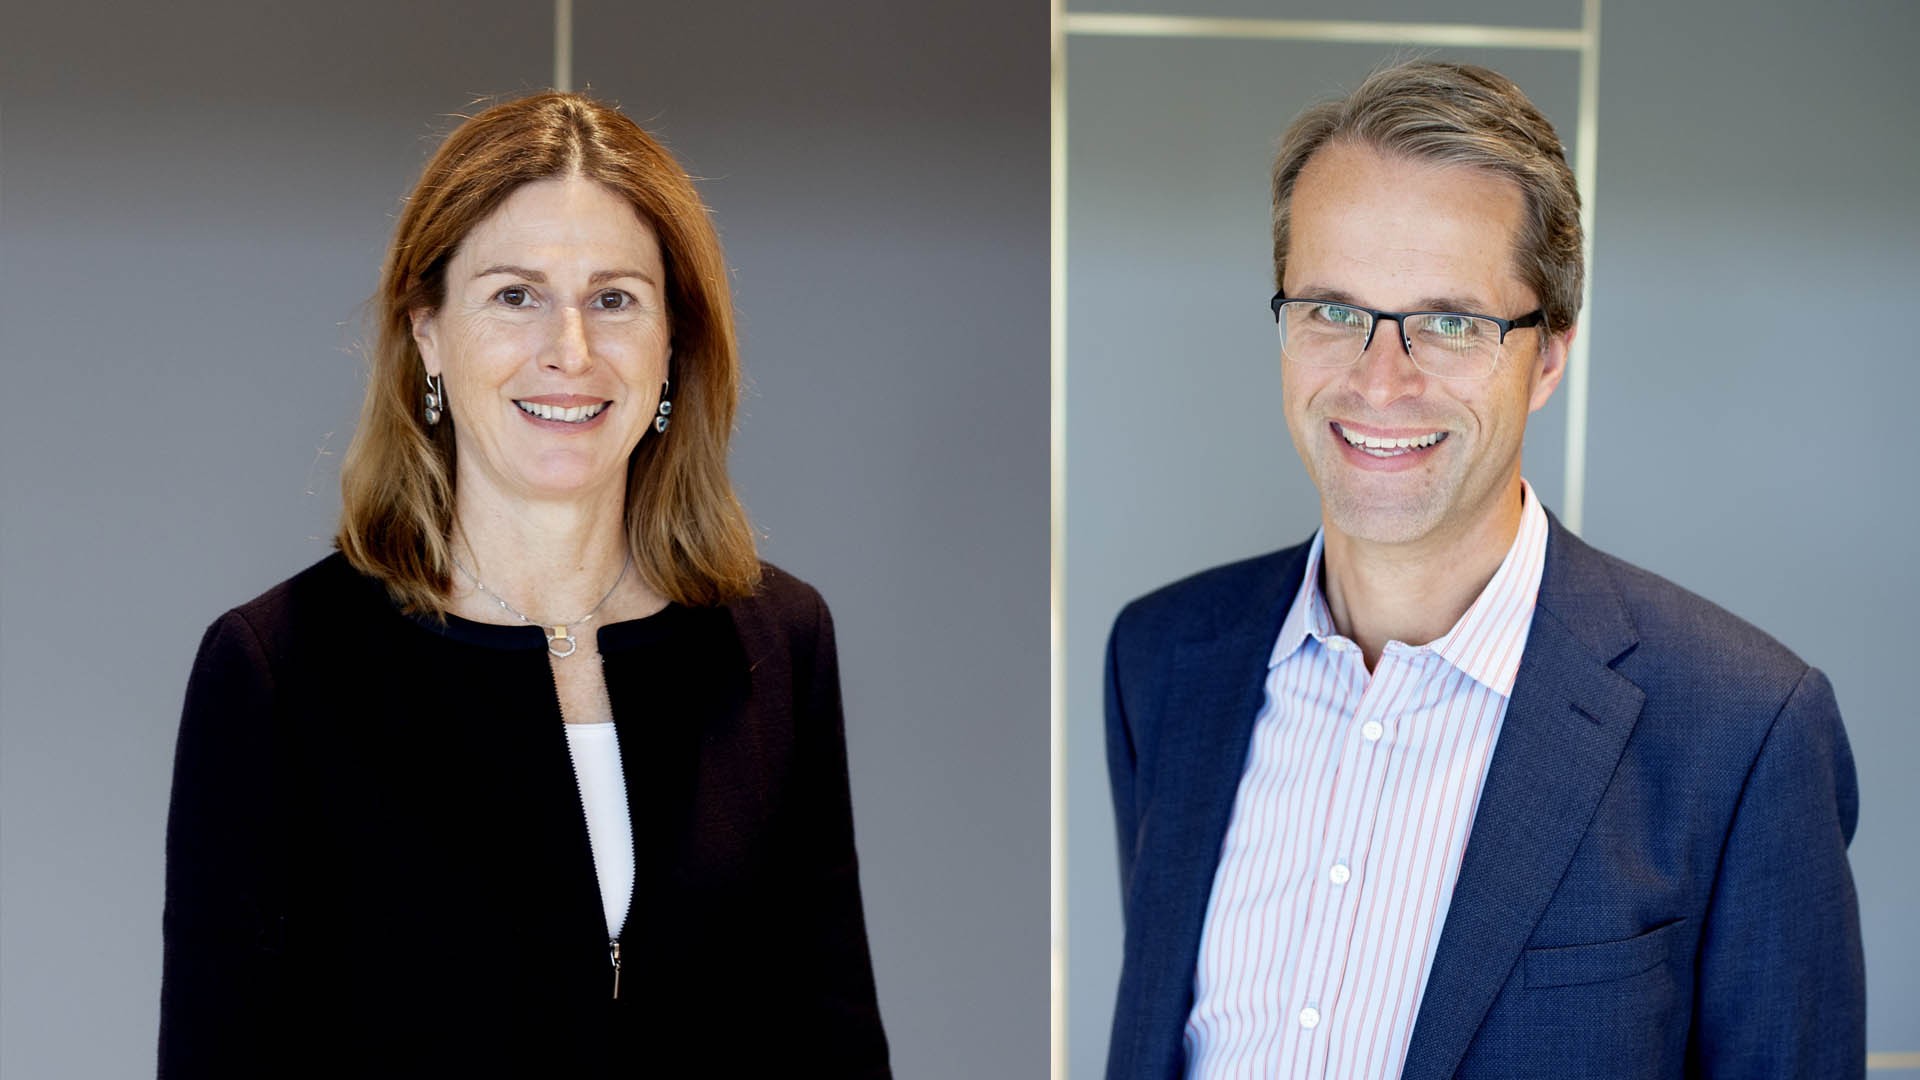 EV Private Equity Welcomes Two New Advisory Board Members